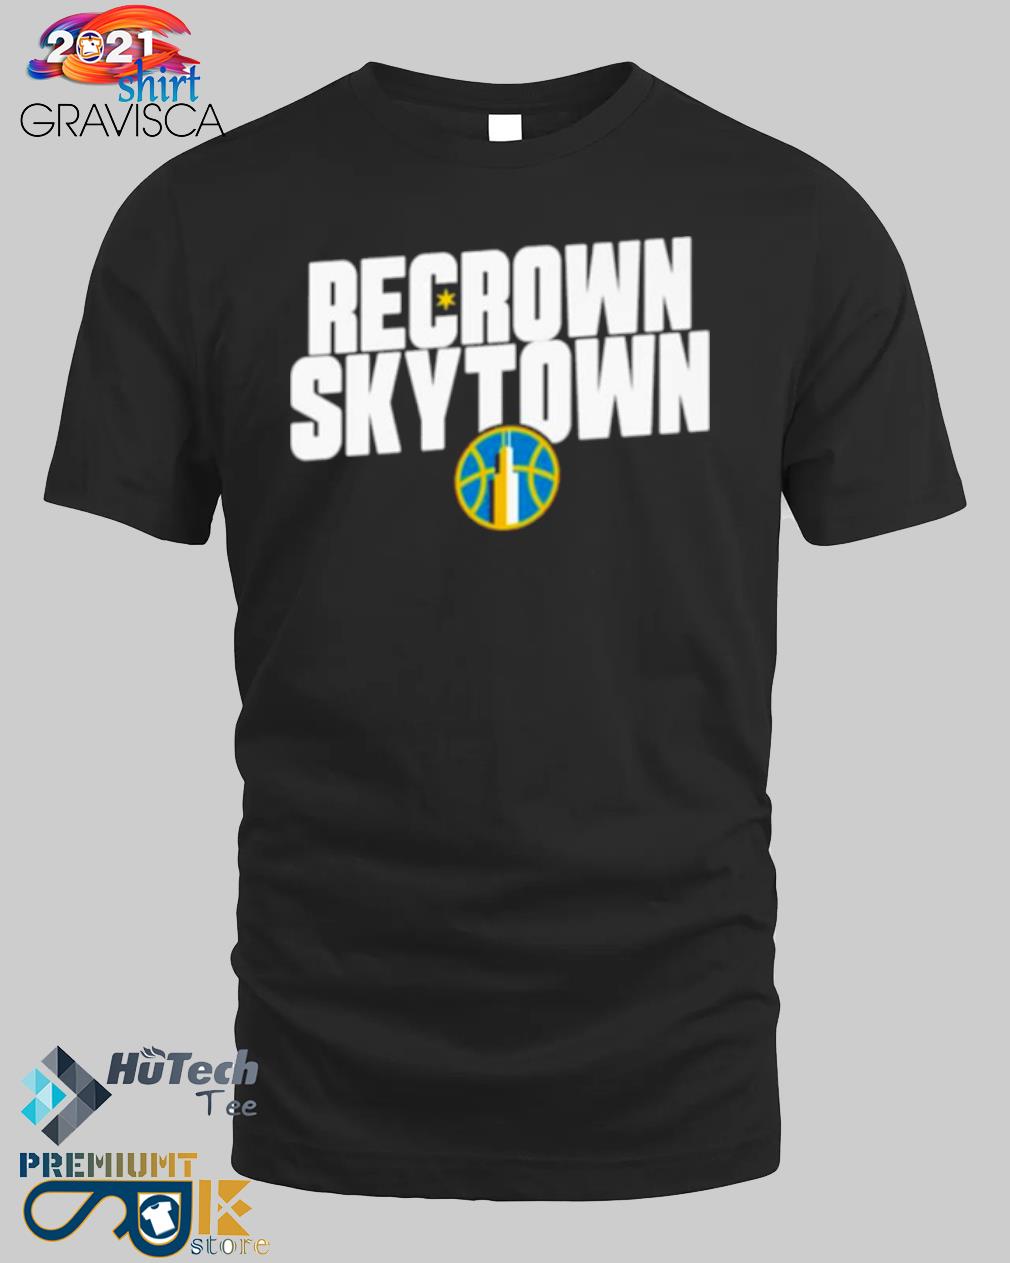 2022 chicagosky recrown skytown 2022 shirt